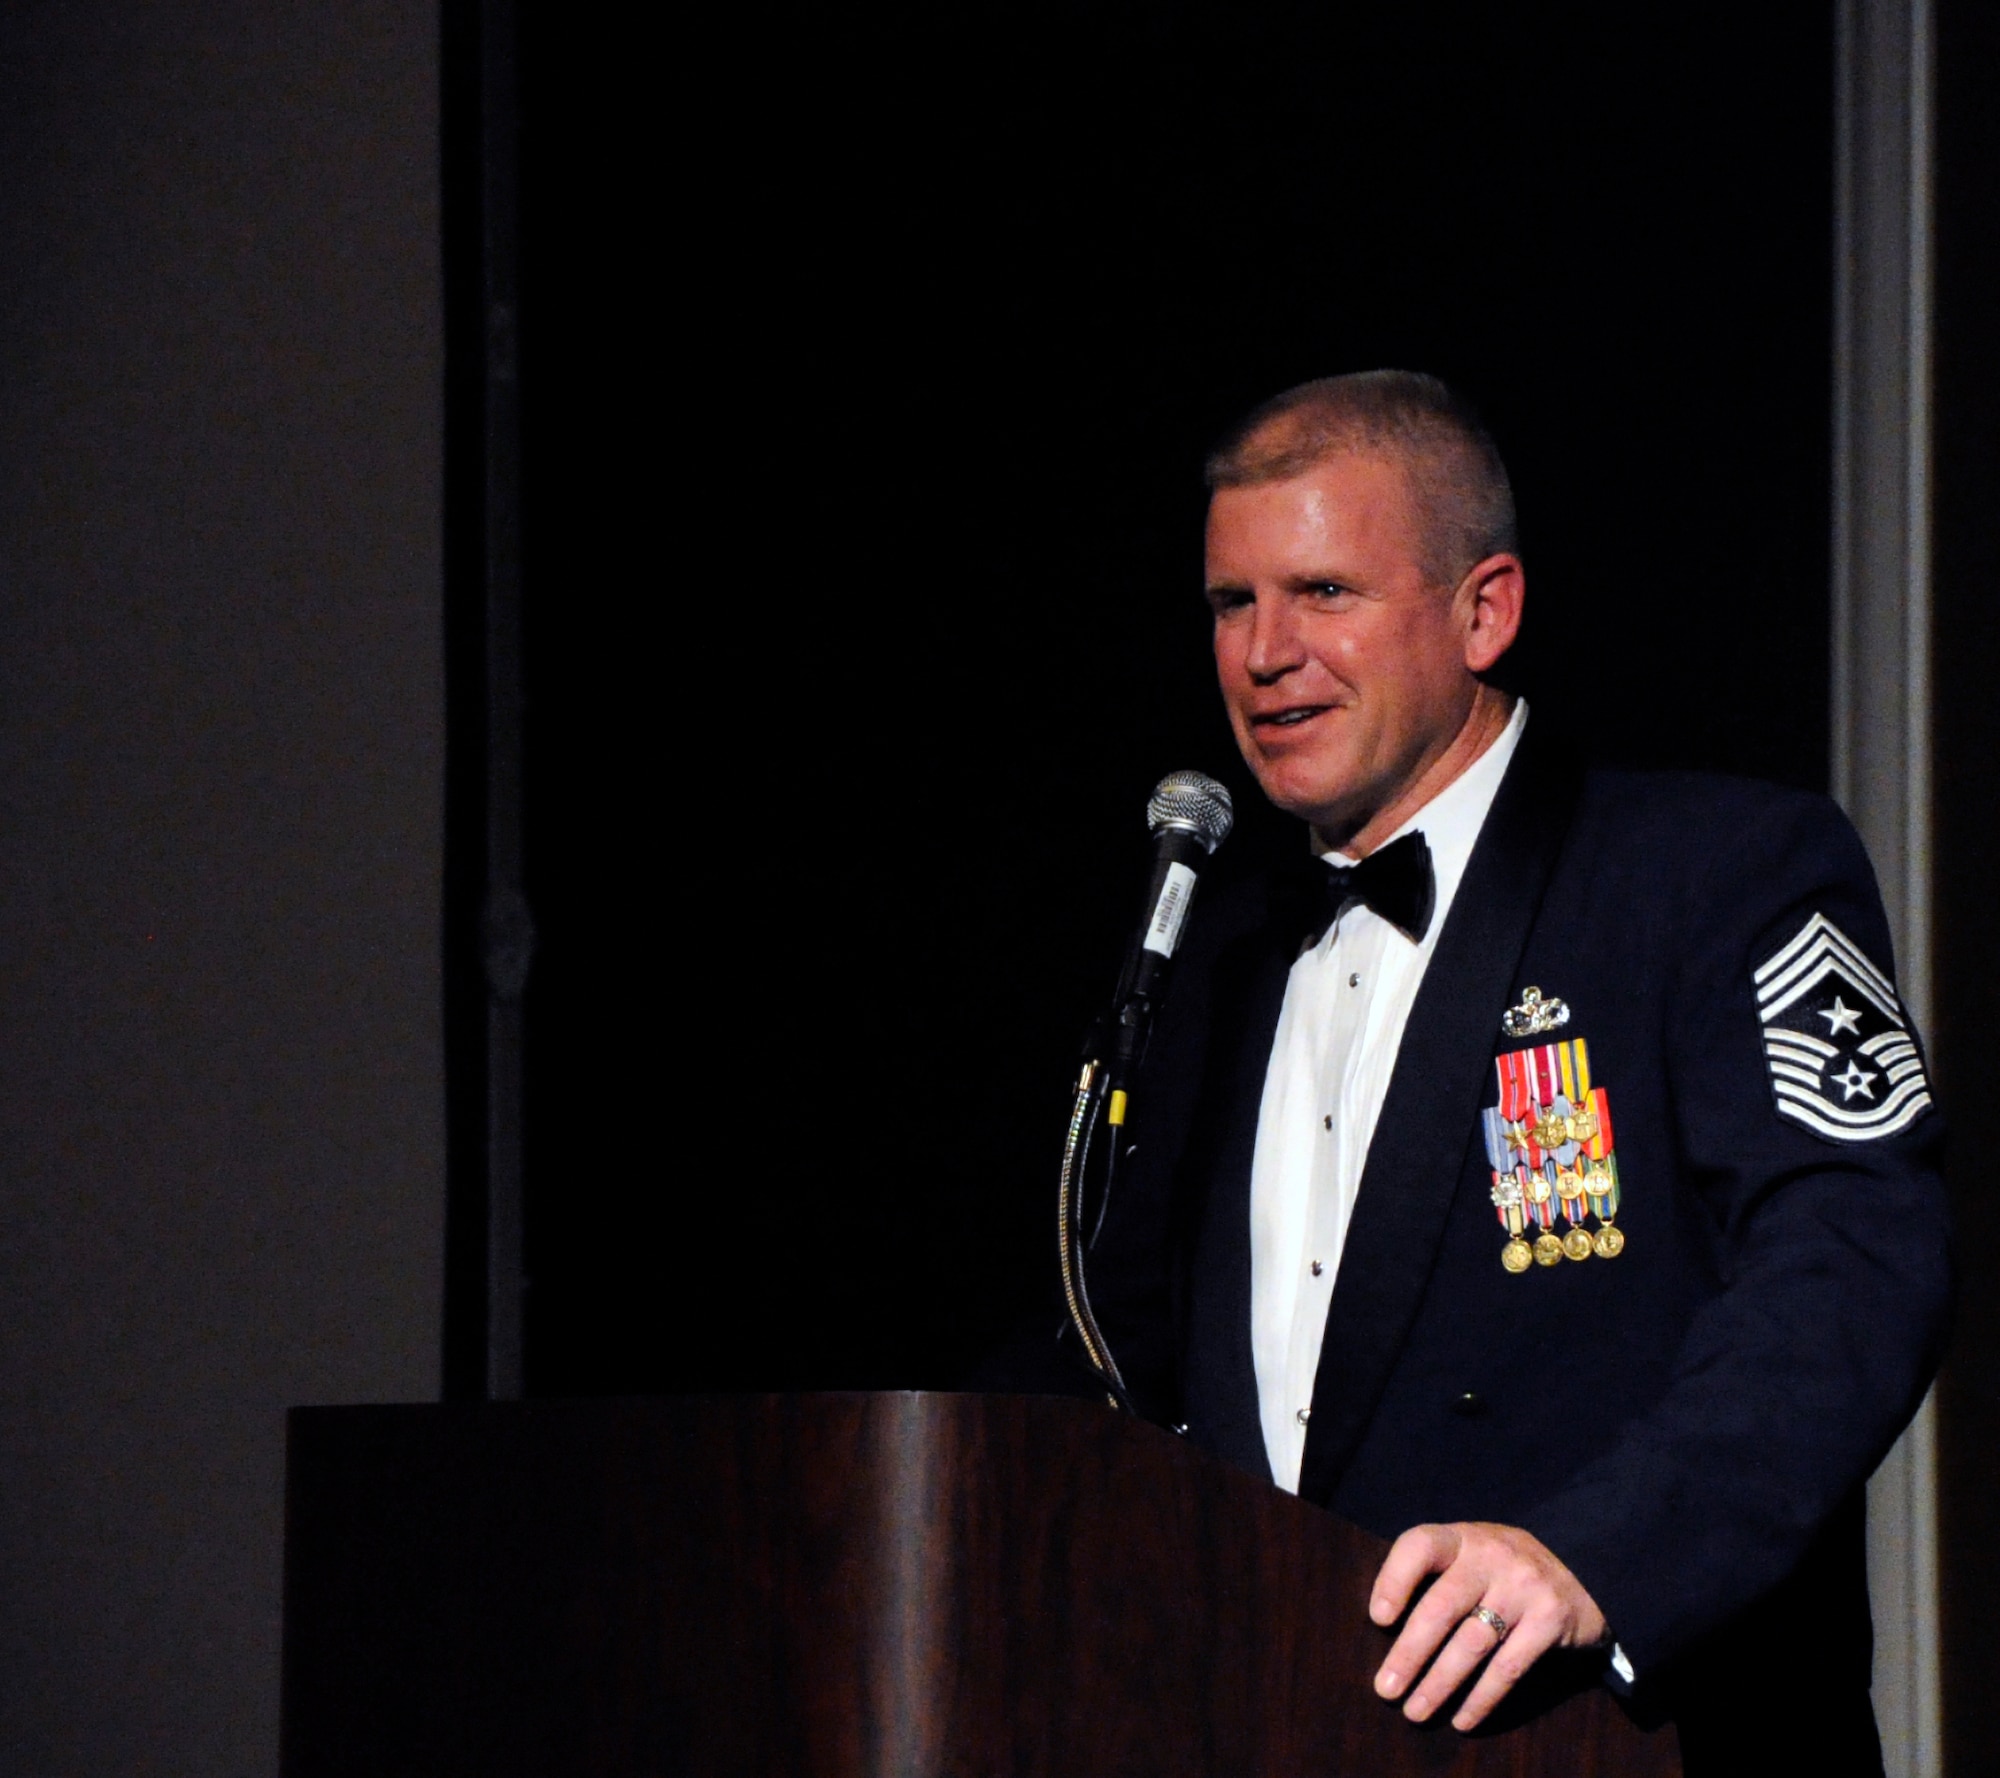 Chief Master Sgt. Harold Clark, 12th Air Force (Air Forces Southern) command chief, introduces the night's guest speaker, Former Chief Master Sergeant of the Air Force Rodney Mckinley, to the 12th AF Outstanding Performer of the Year banquet attendees in Las Vegas Feb. 23.